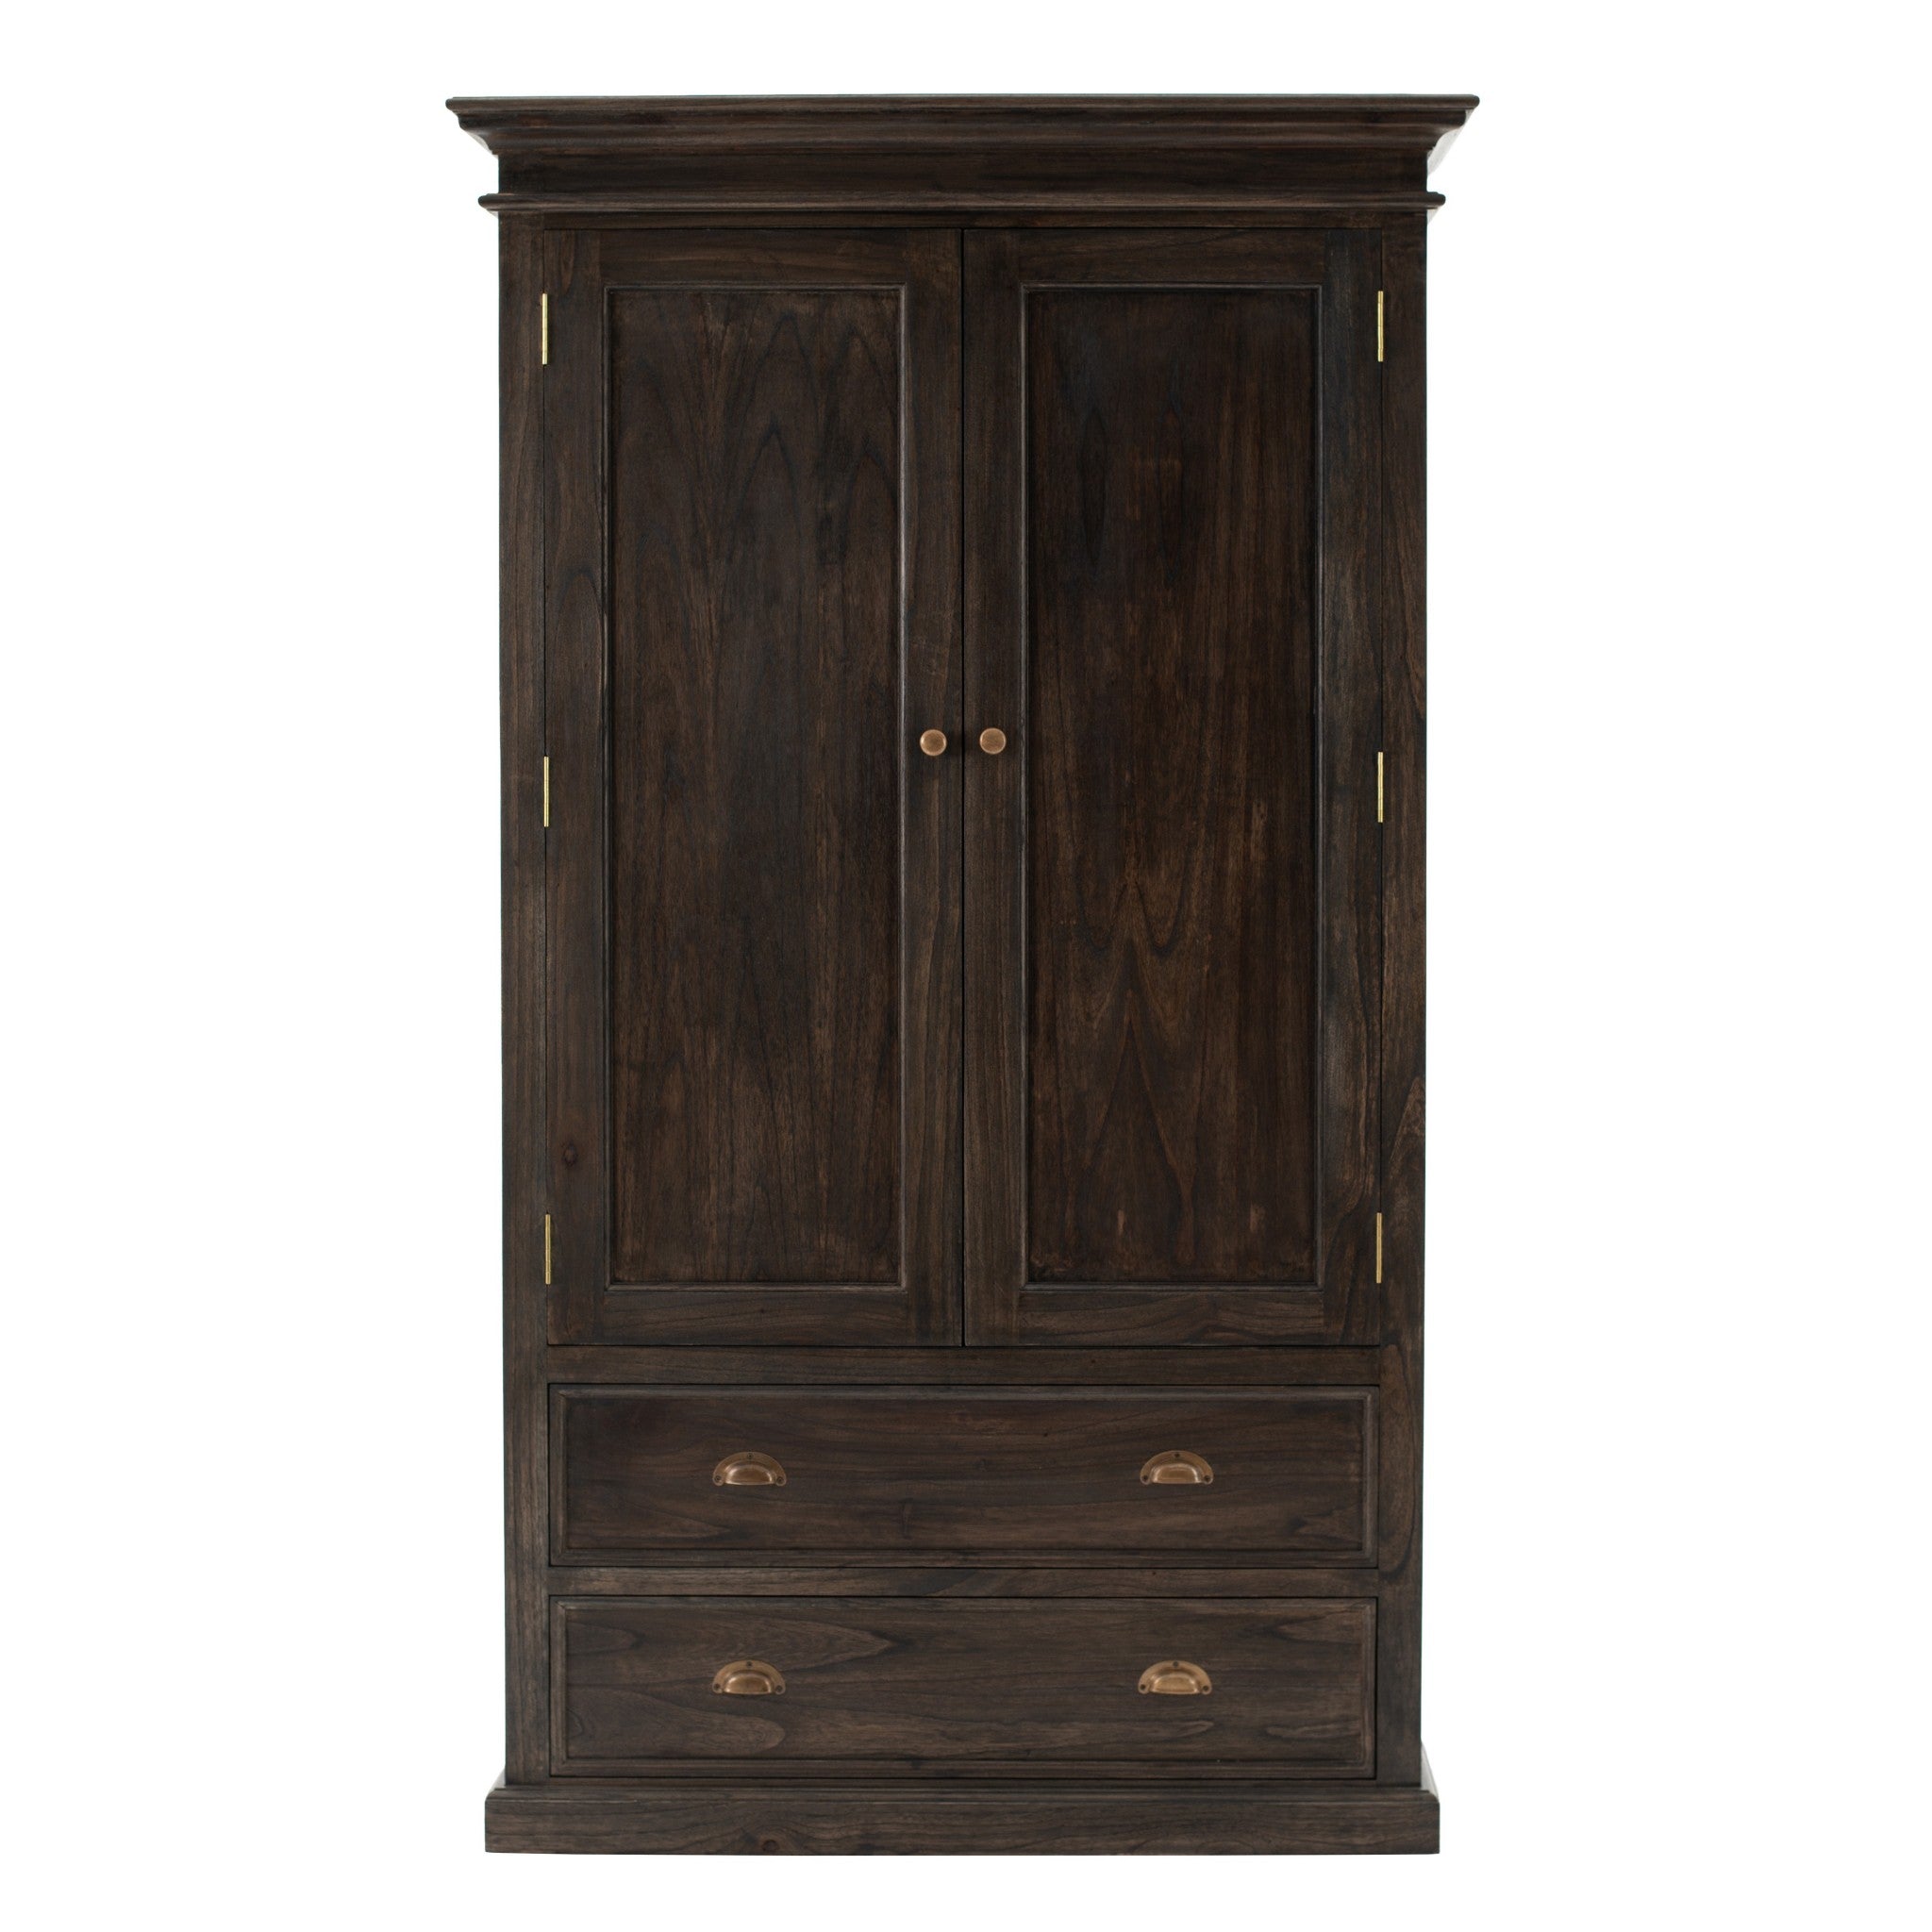 43" Dark Brown Standard Wardrobe With Three Shelves And Two Drawers